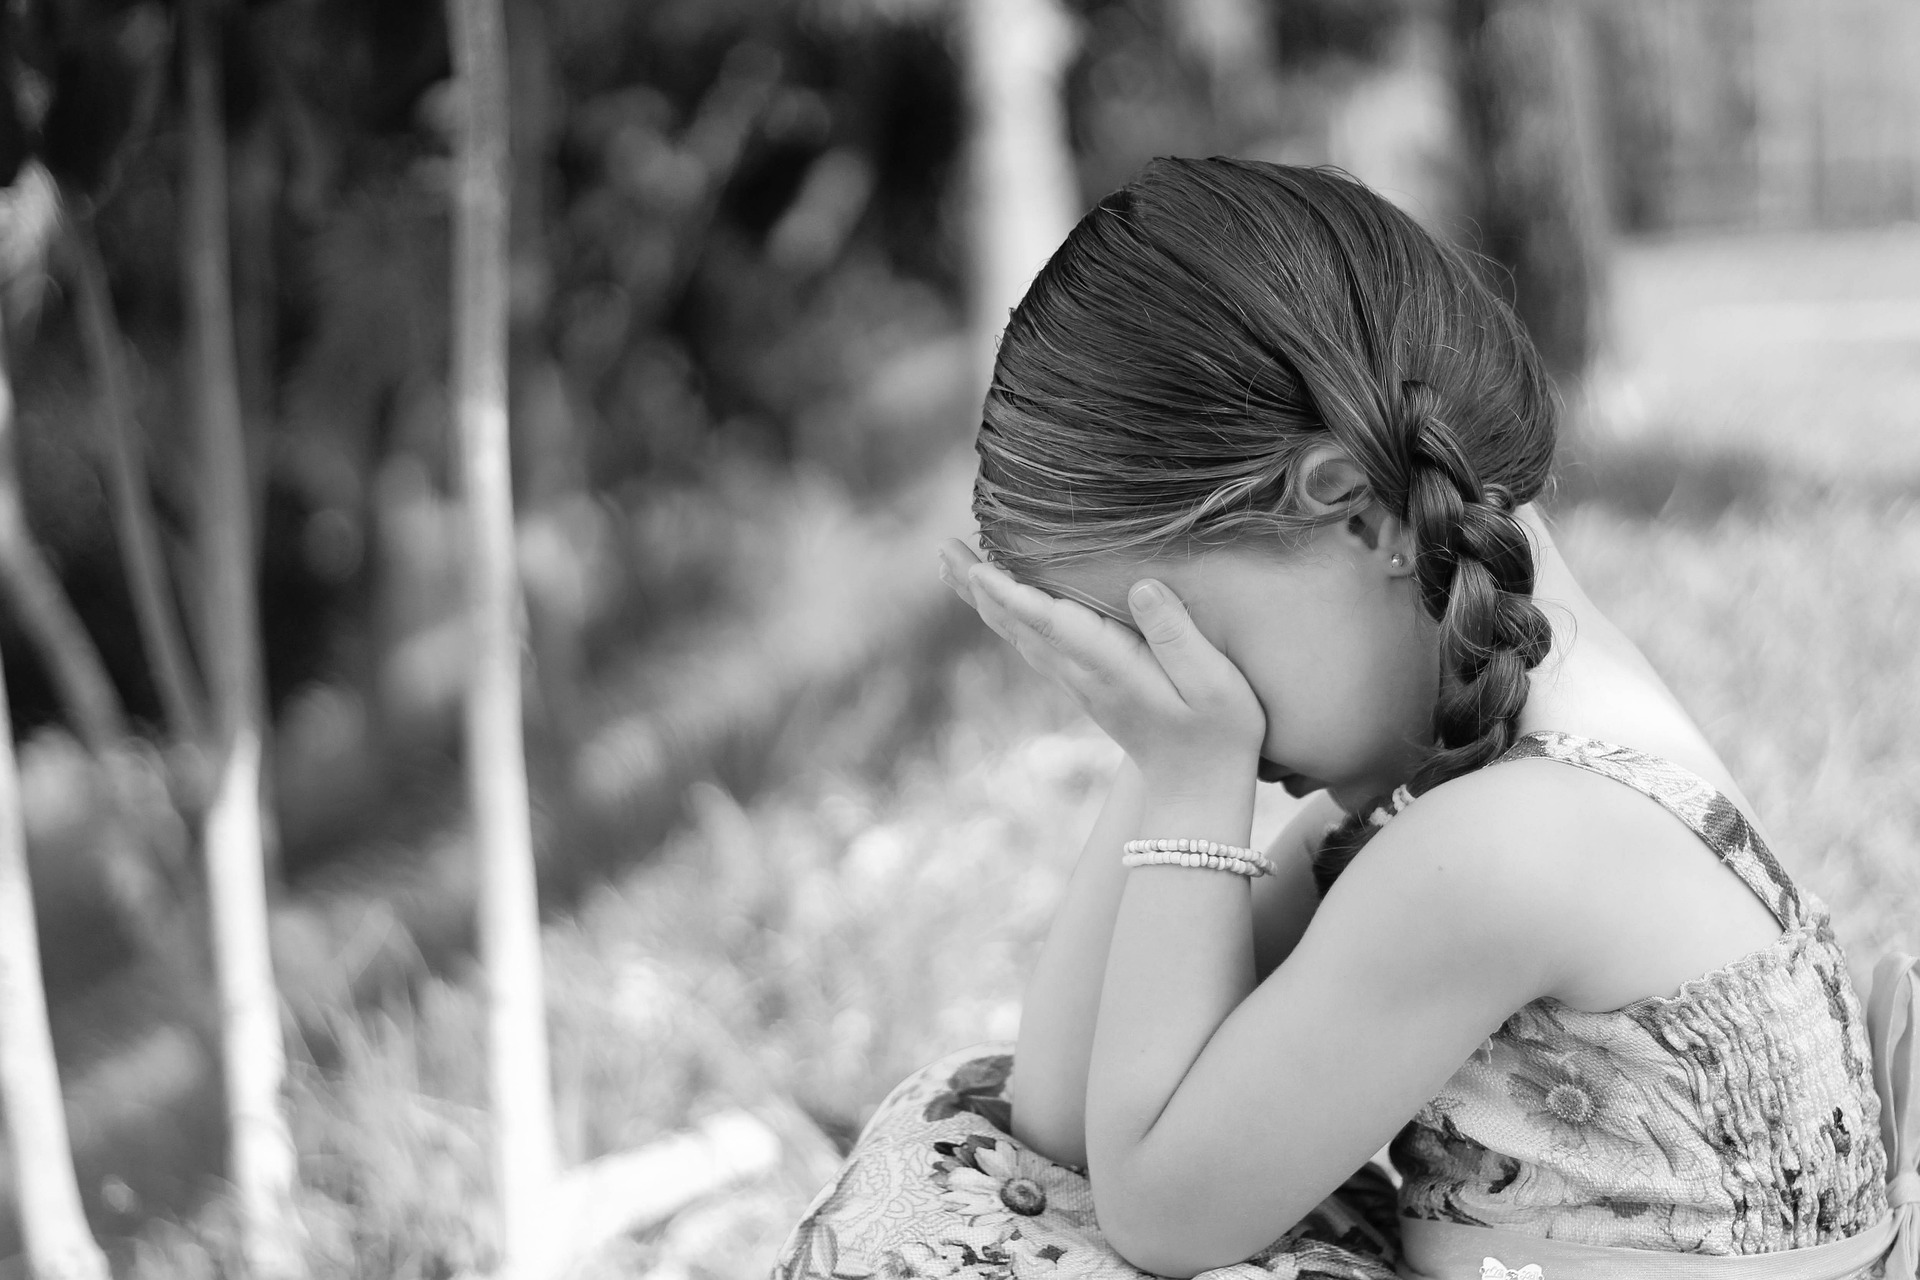 A grayscale photo of a little girl crying | Source: Pixabay